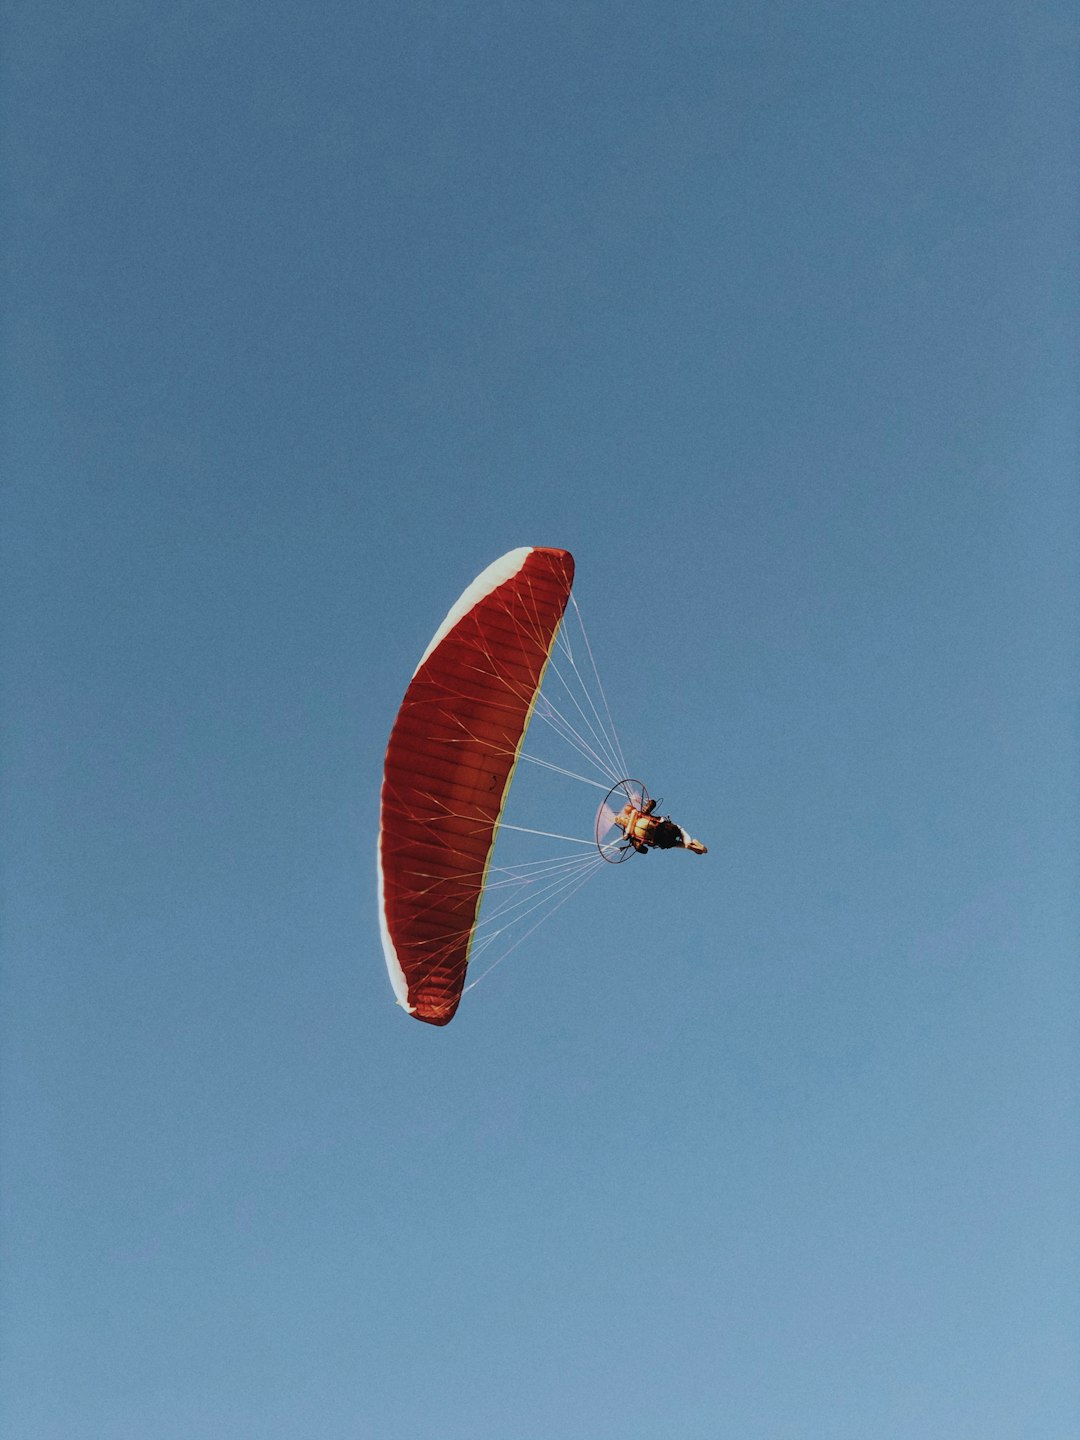 person in red parachute under blue sky during daytime